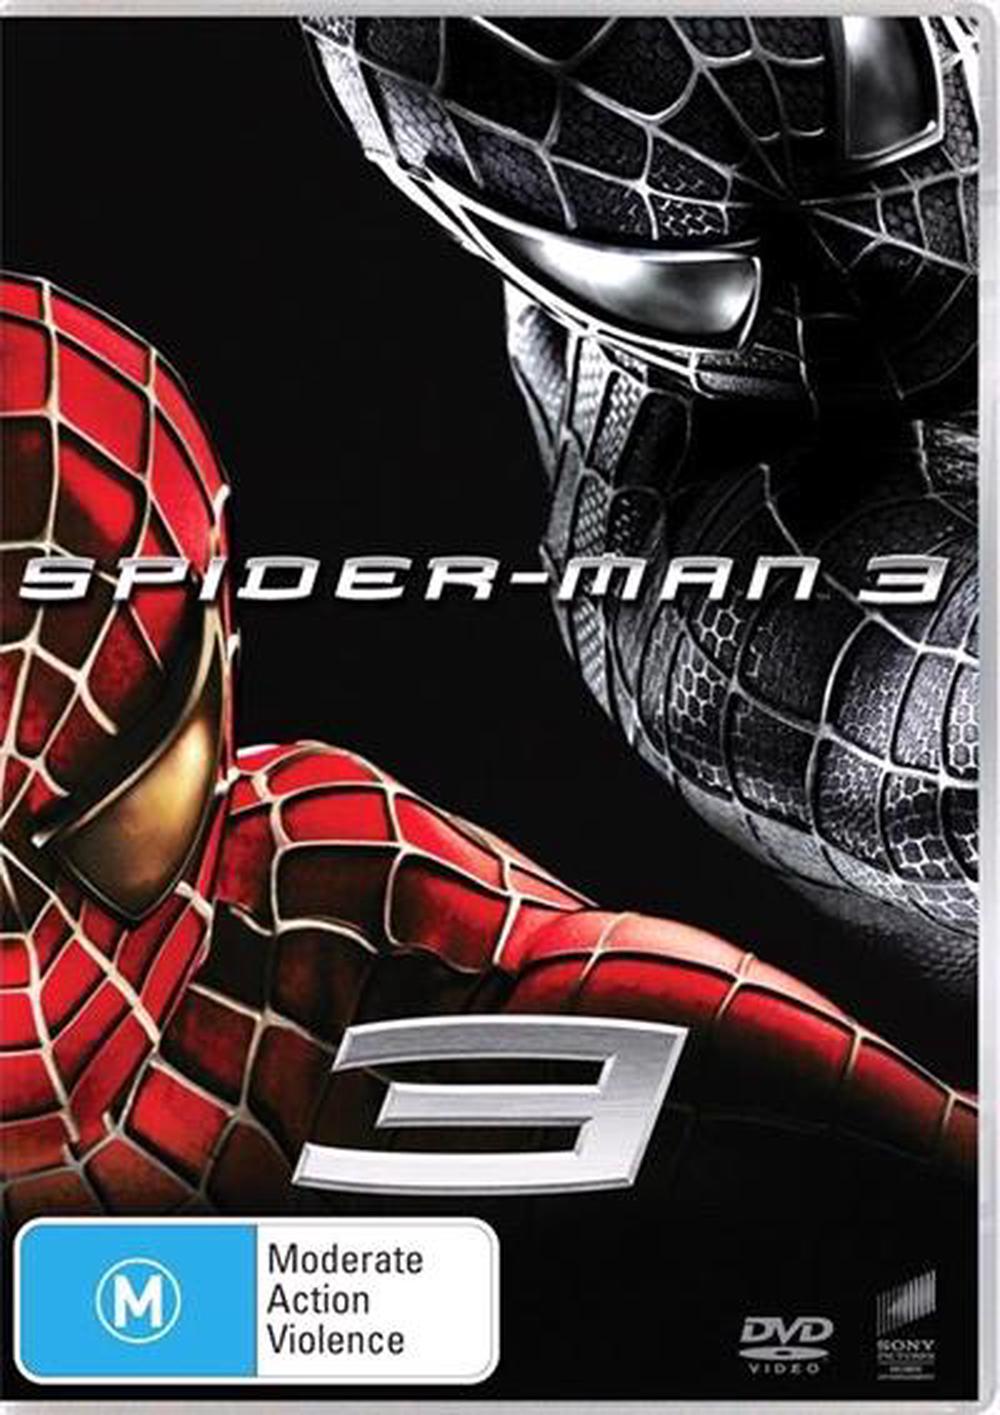 Spiderman 3, DVD | Buy online at The Nile